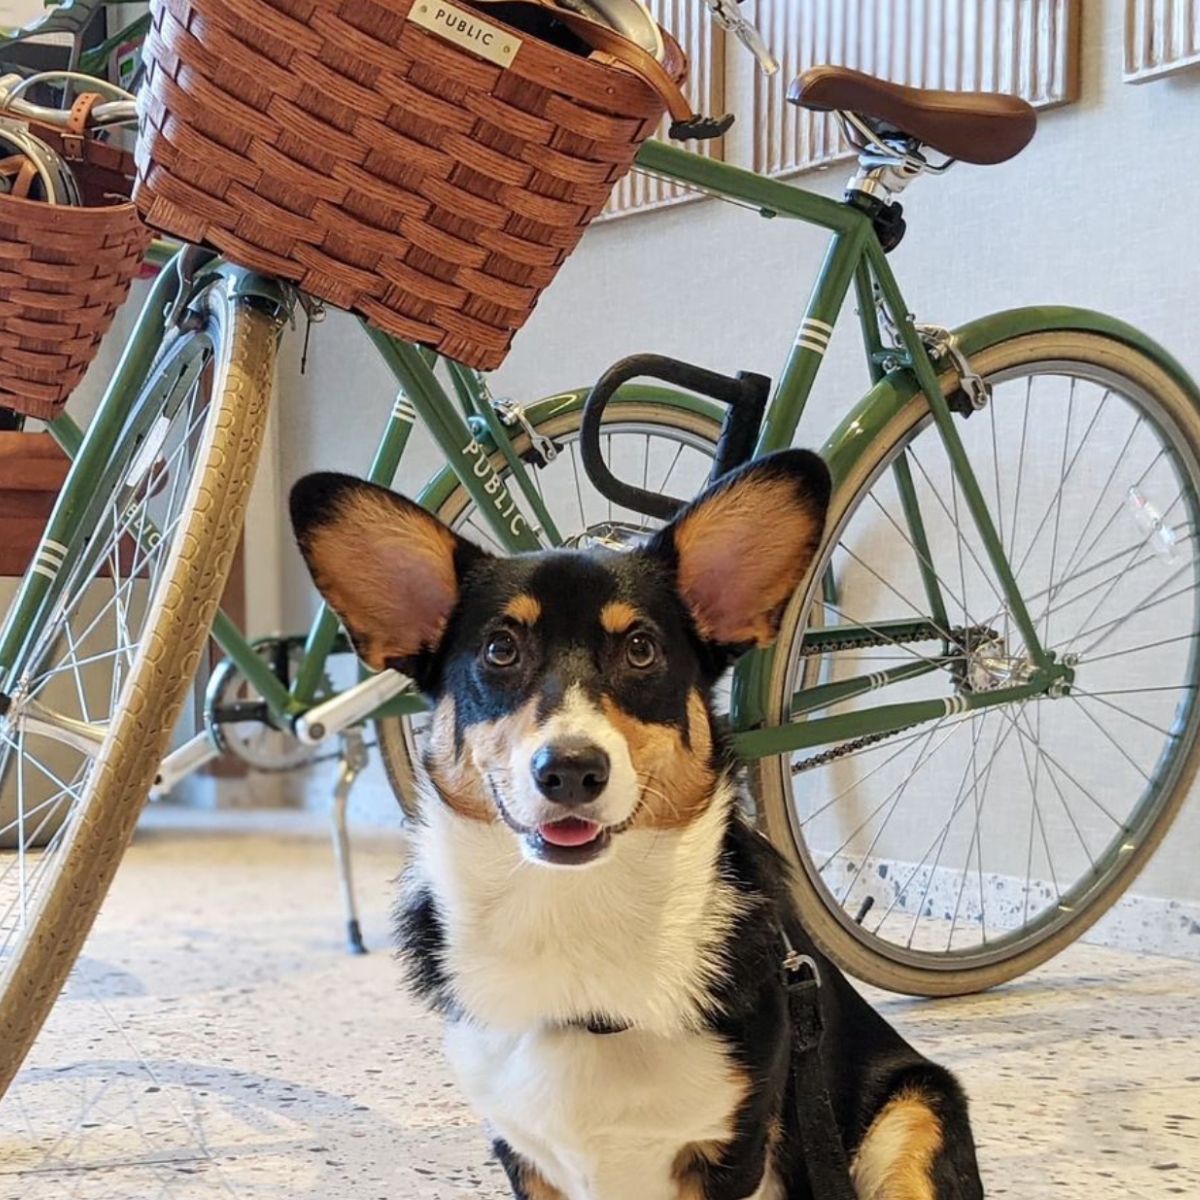 Dog sitting on the floor in front of two bicycles with bike baskets attached